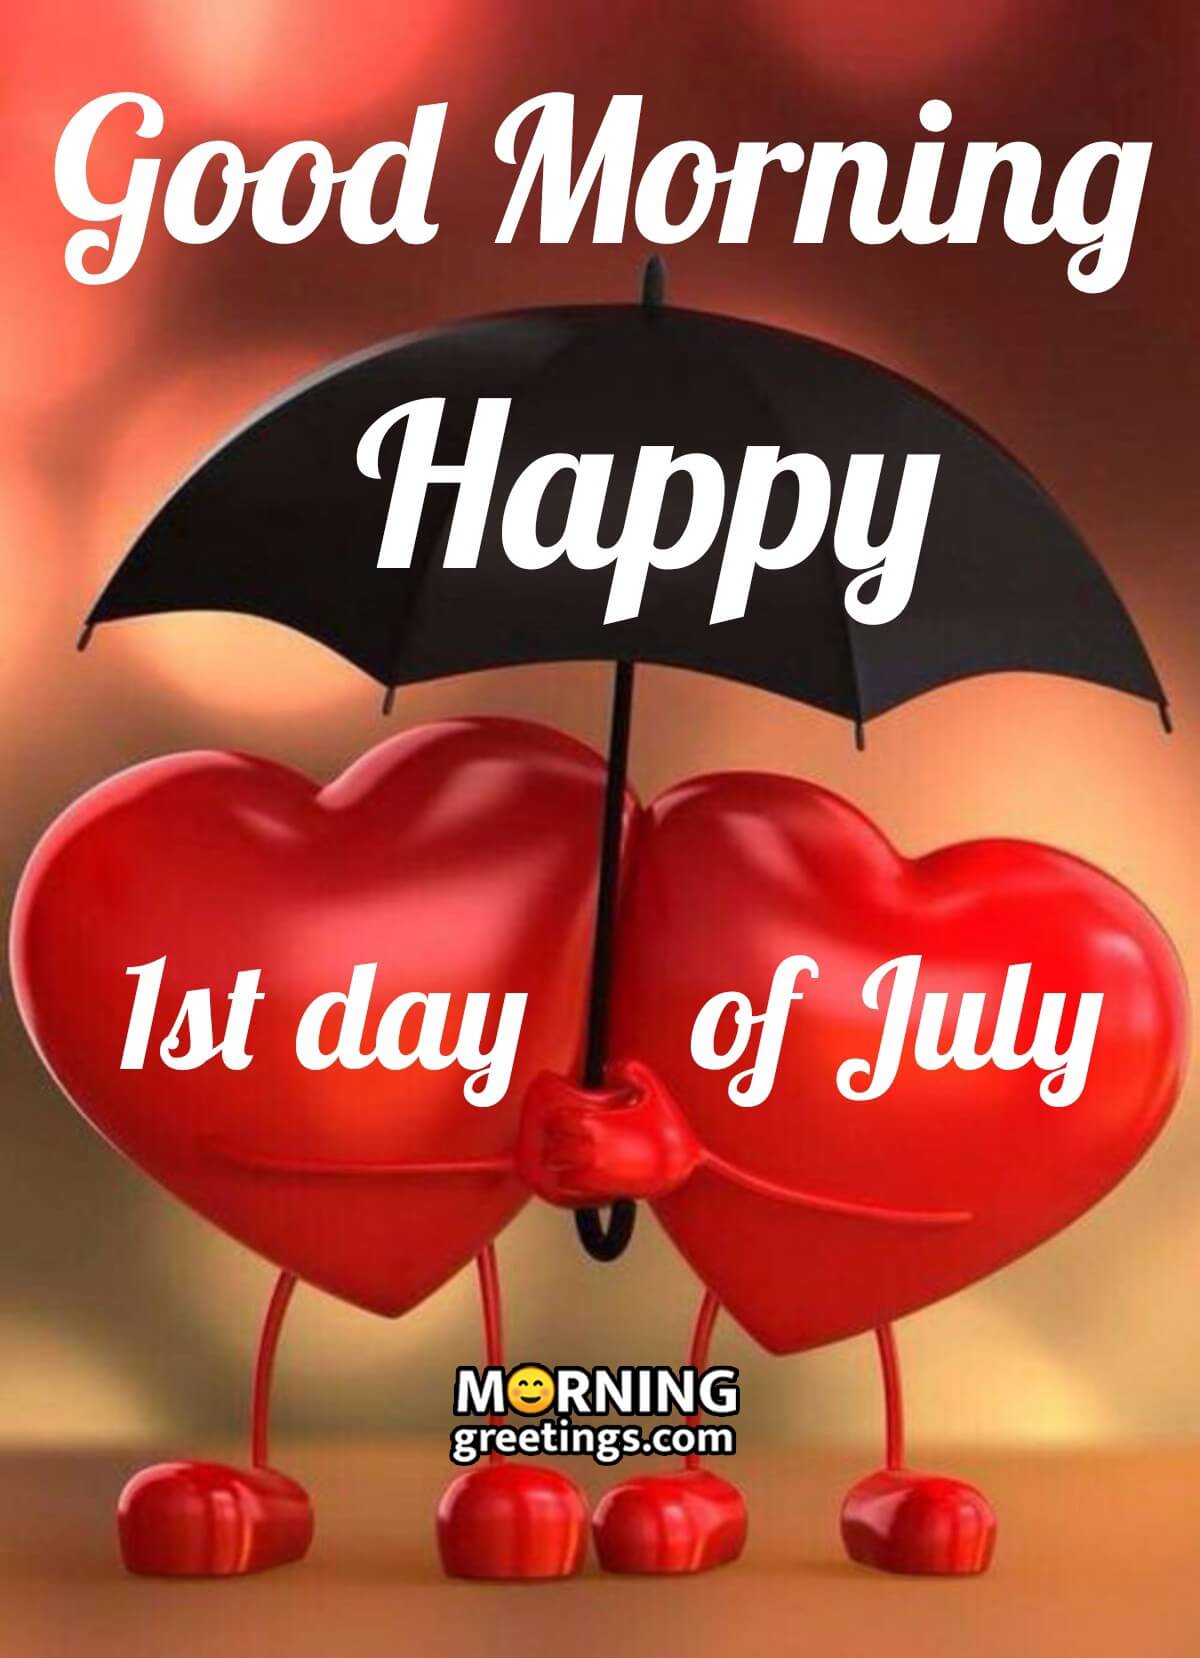 Good Morning Happy !st Day Of July